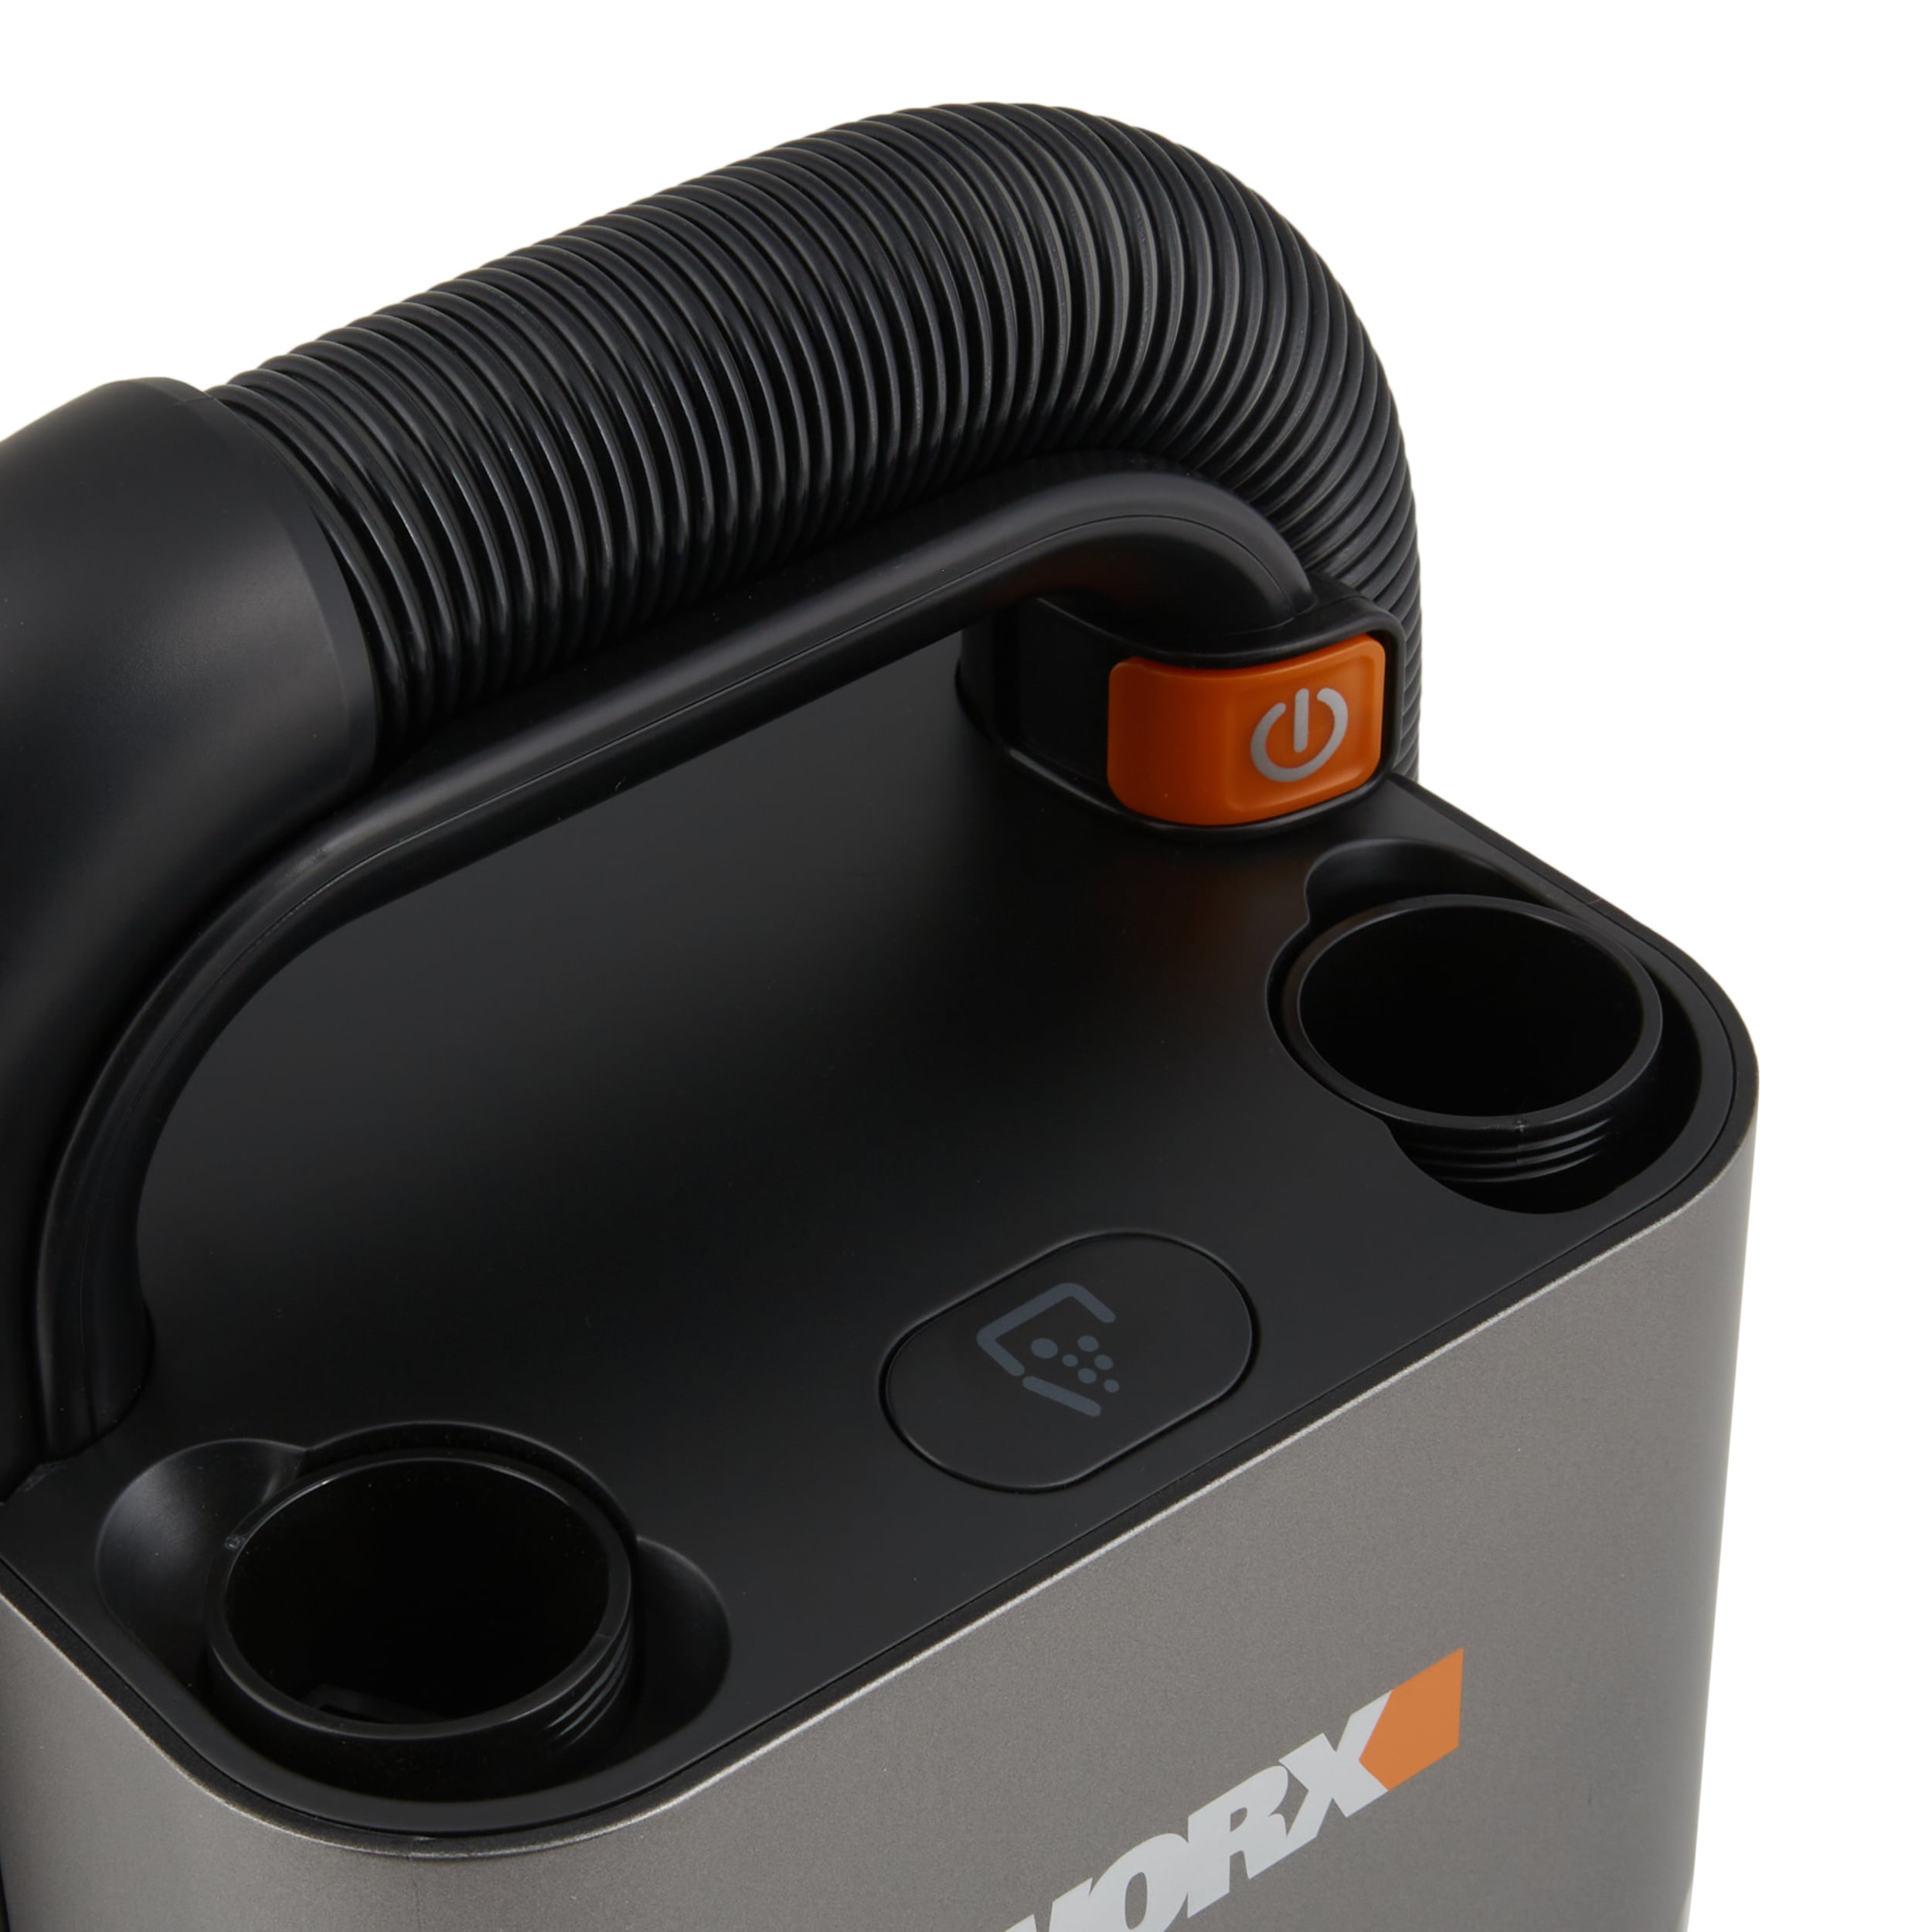 New WORX 20V Power Share Stick Vacuum Eliminates Down Time with